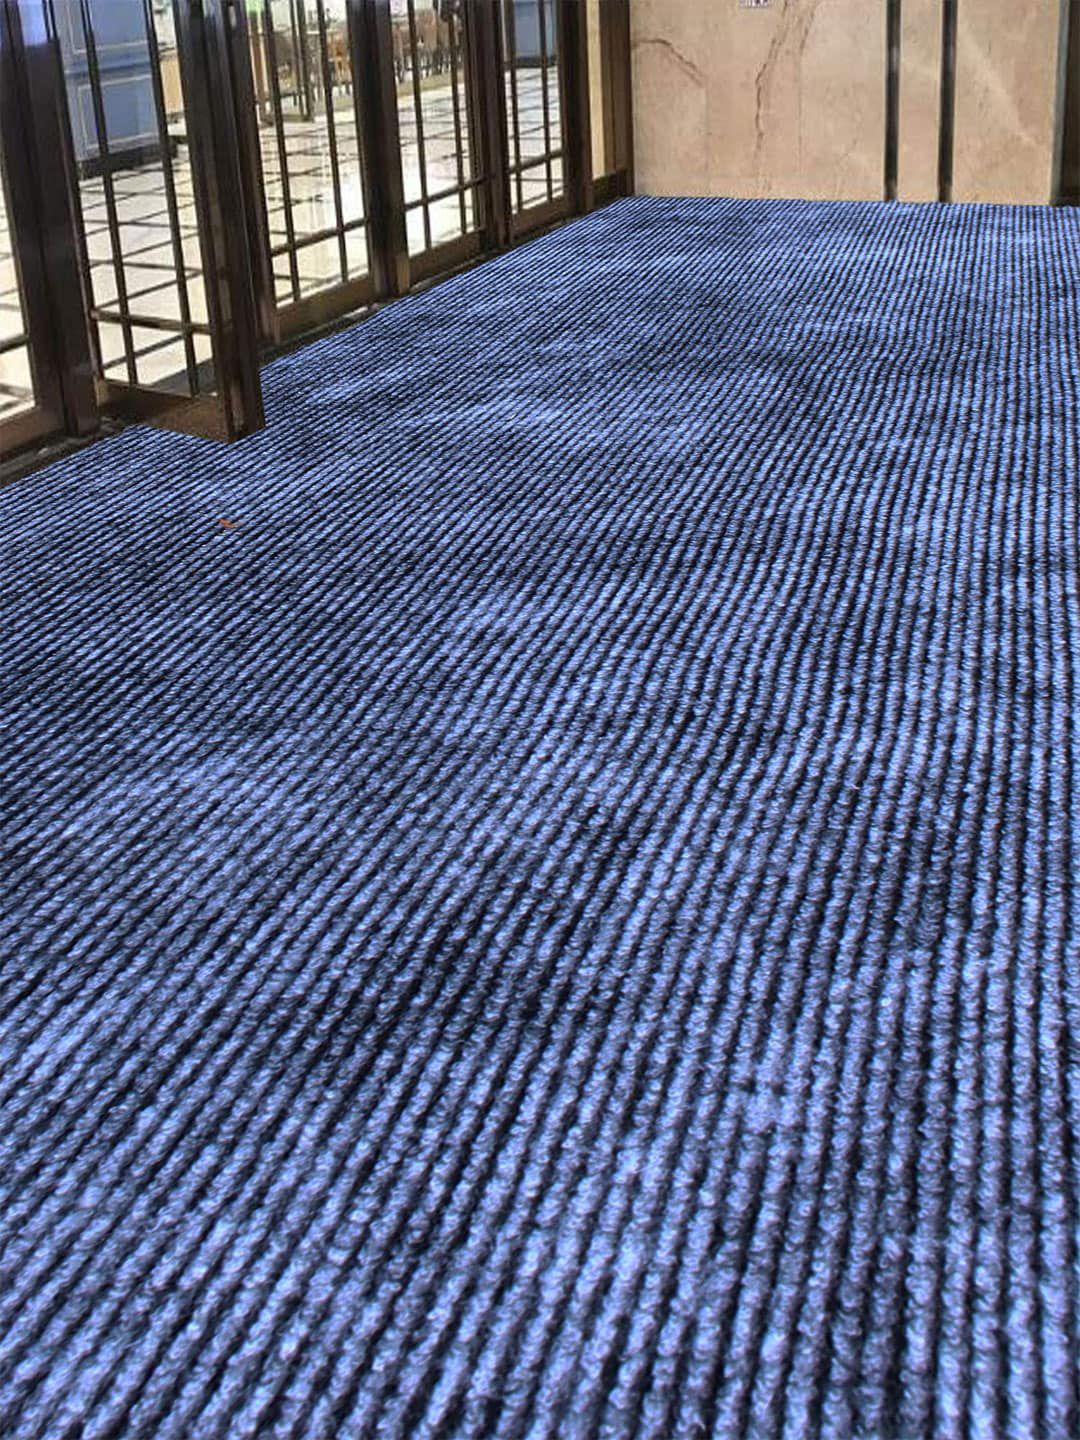 LUXEHOME INTERNATIONAL Grey Striped Carpets Price in India